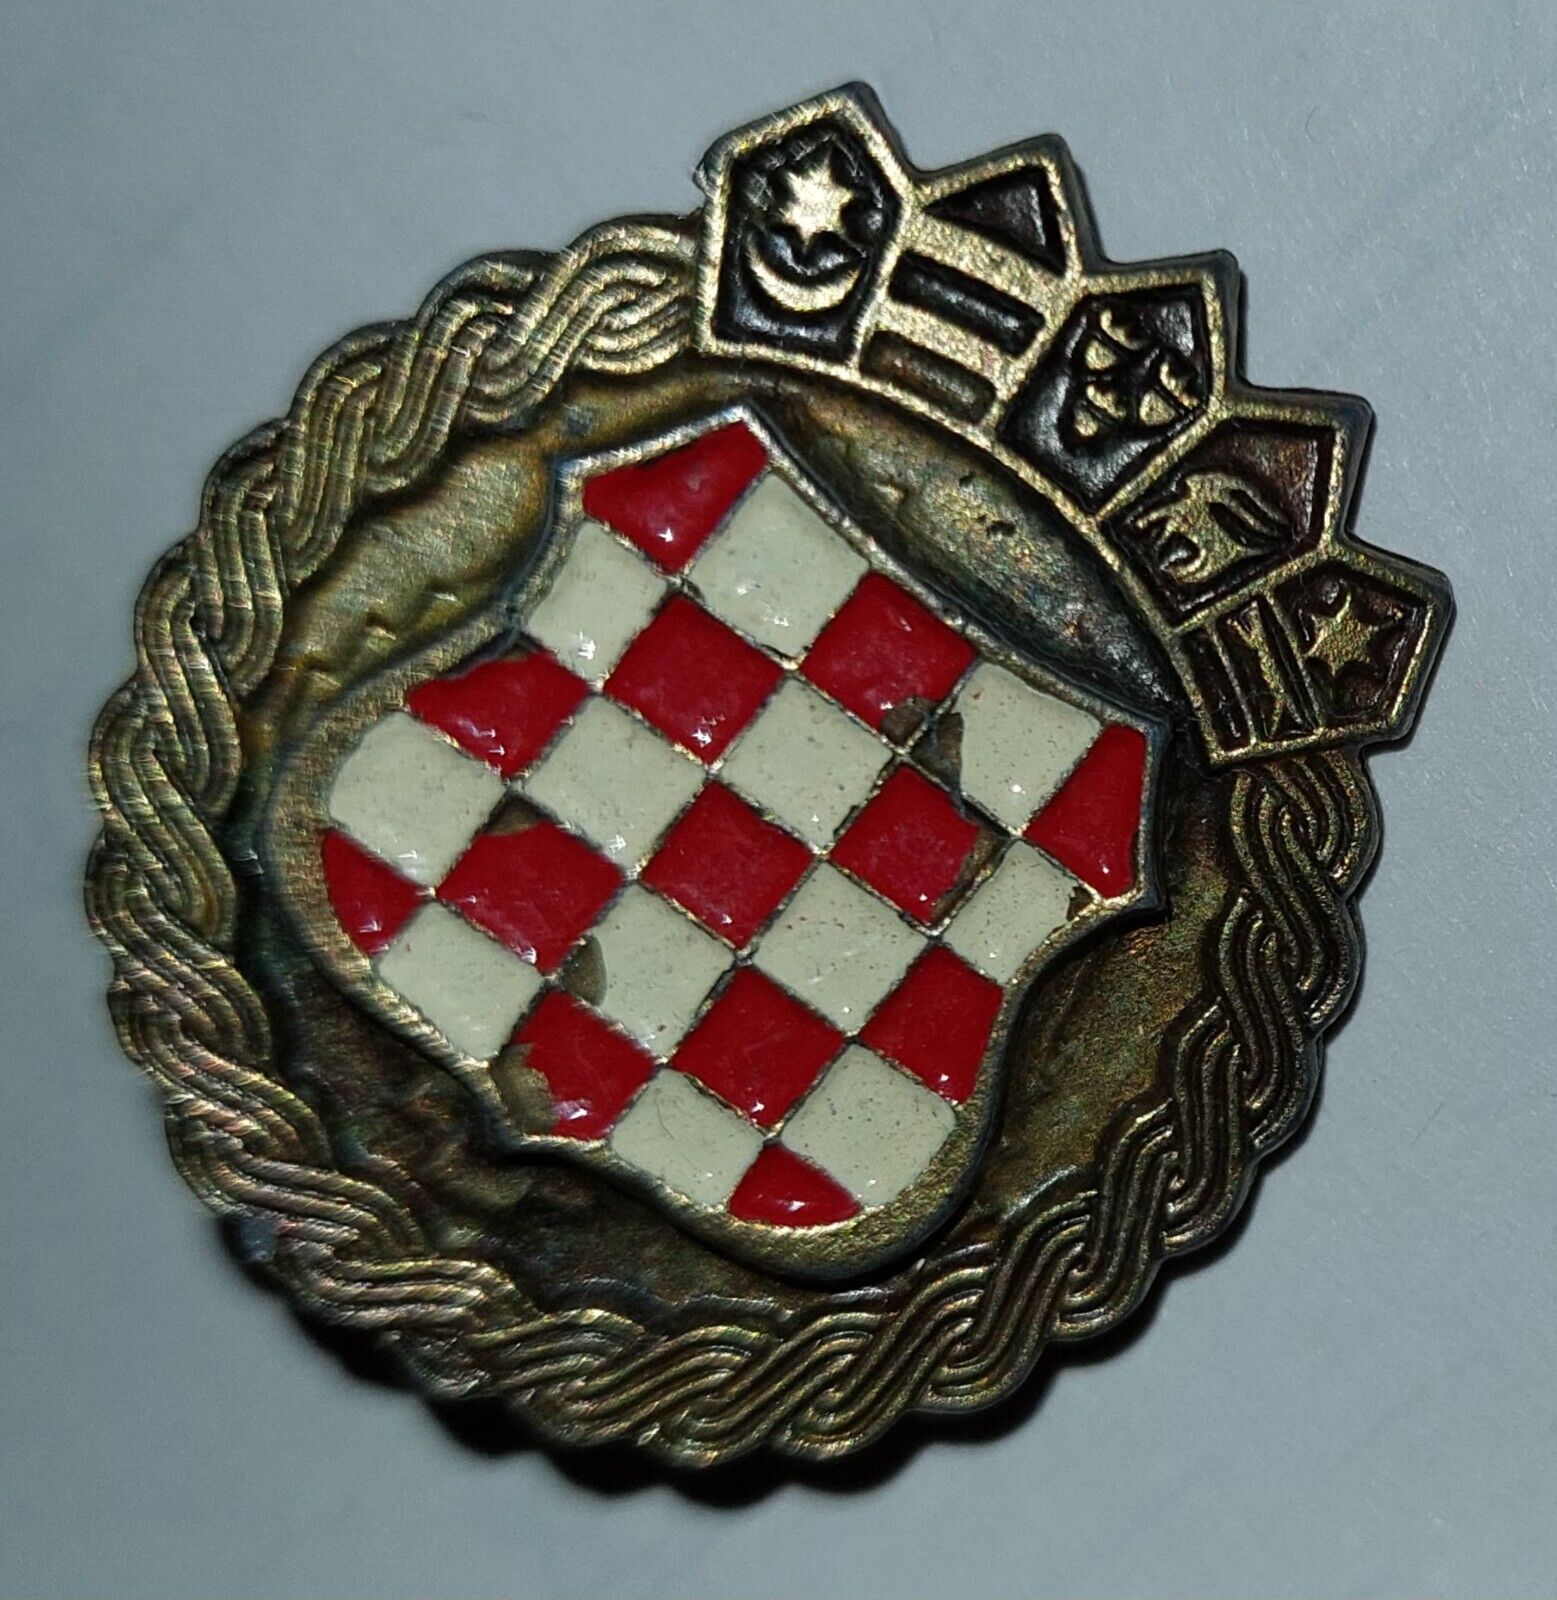 Metal Cap Badge from Croatia- Used in the wartime from the beginings